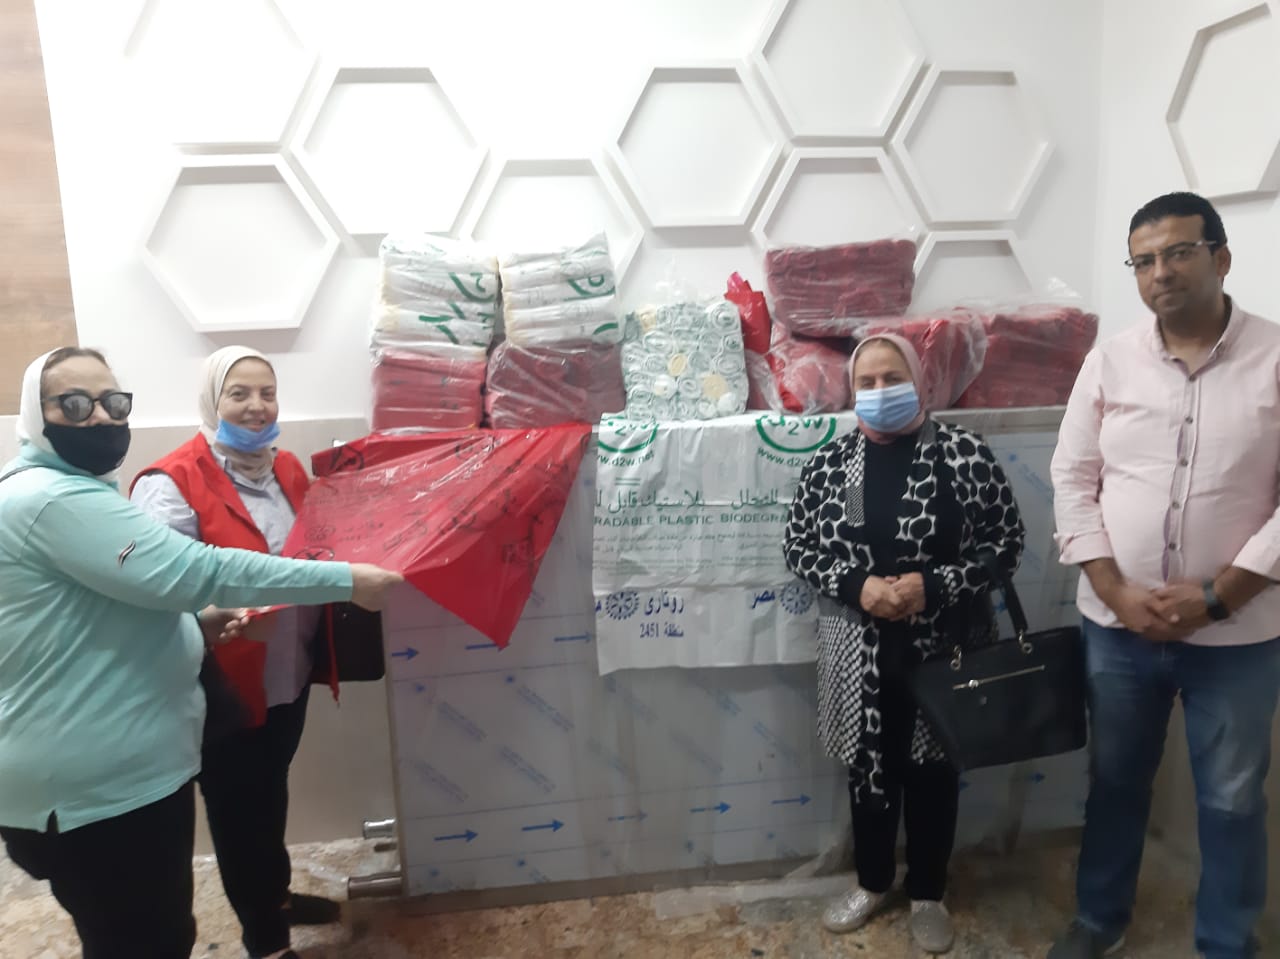 Mrs. Nadia Mohye El Din and Dr.Nagwa El Oreibei donated the bags